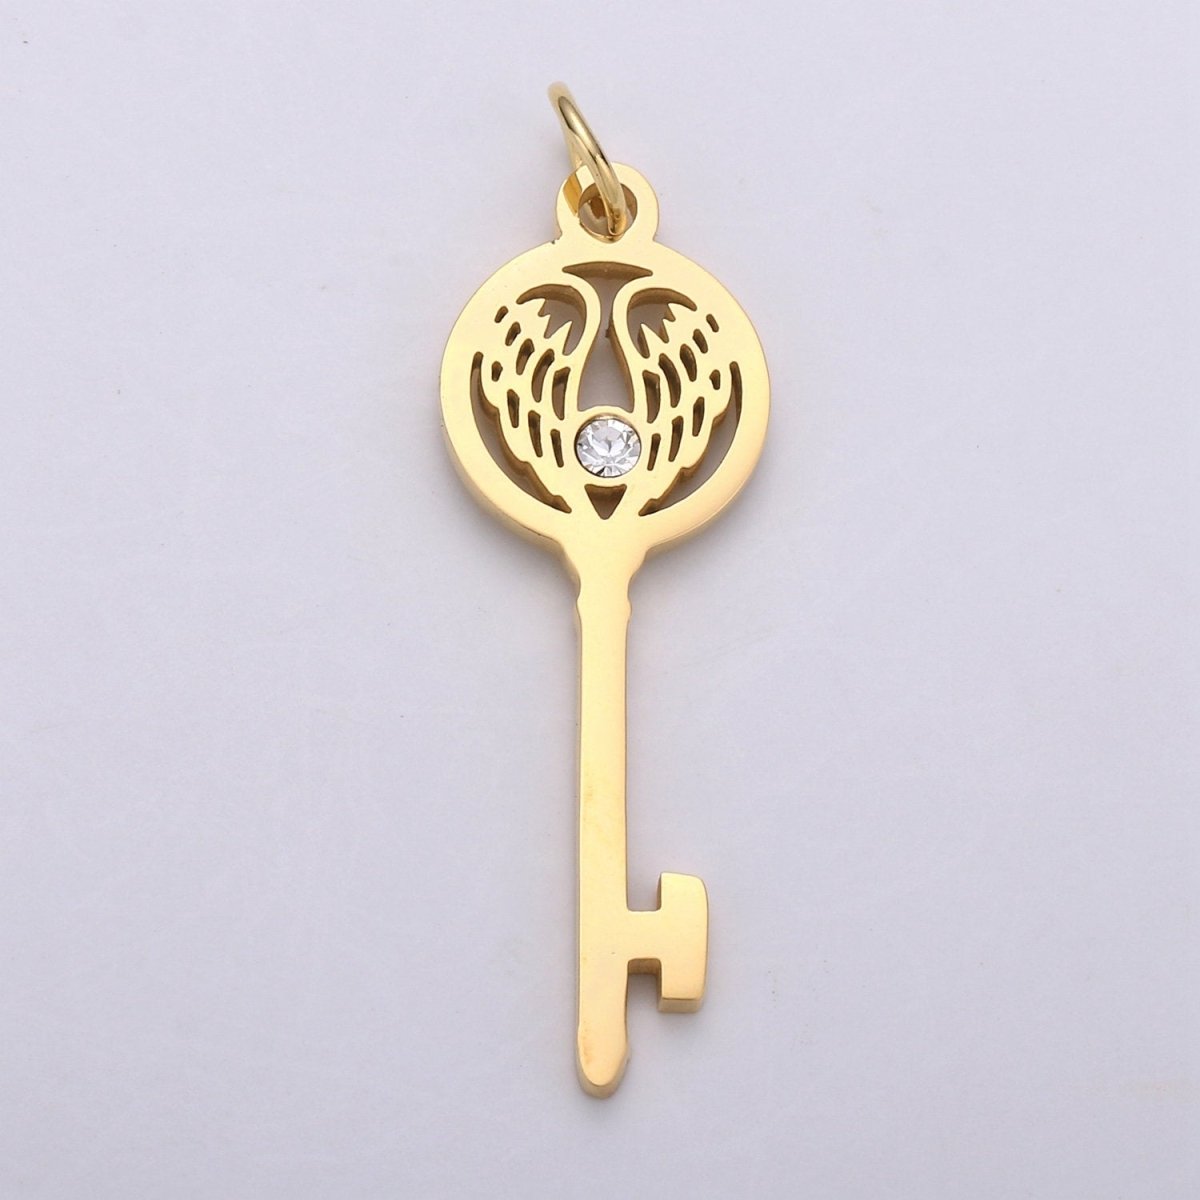 1pc 14k Gold Filled Key Pendant Charm, Dainty Wing Key Pendant Charm, Gold Filled Key Pendant, For DIY Jewelry Making Supply E-695 - DLUXCA